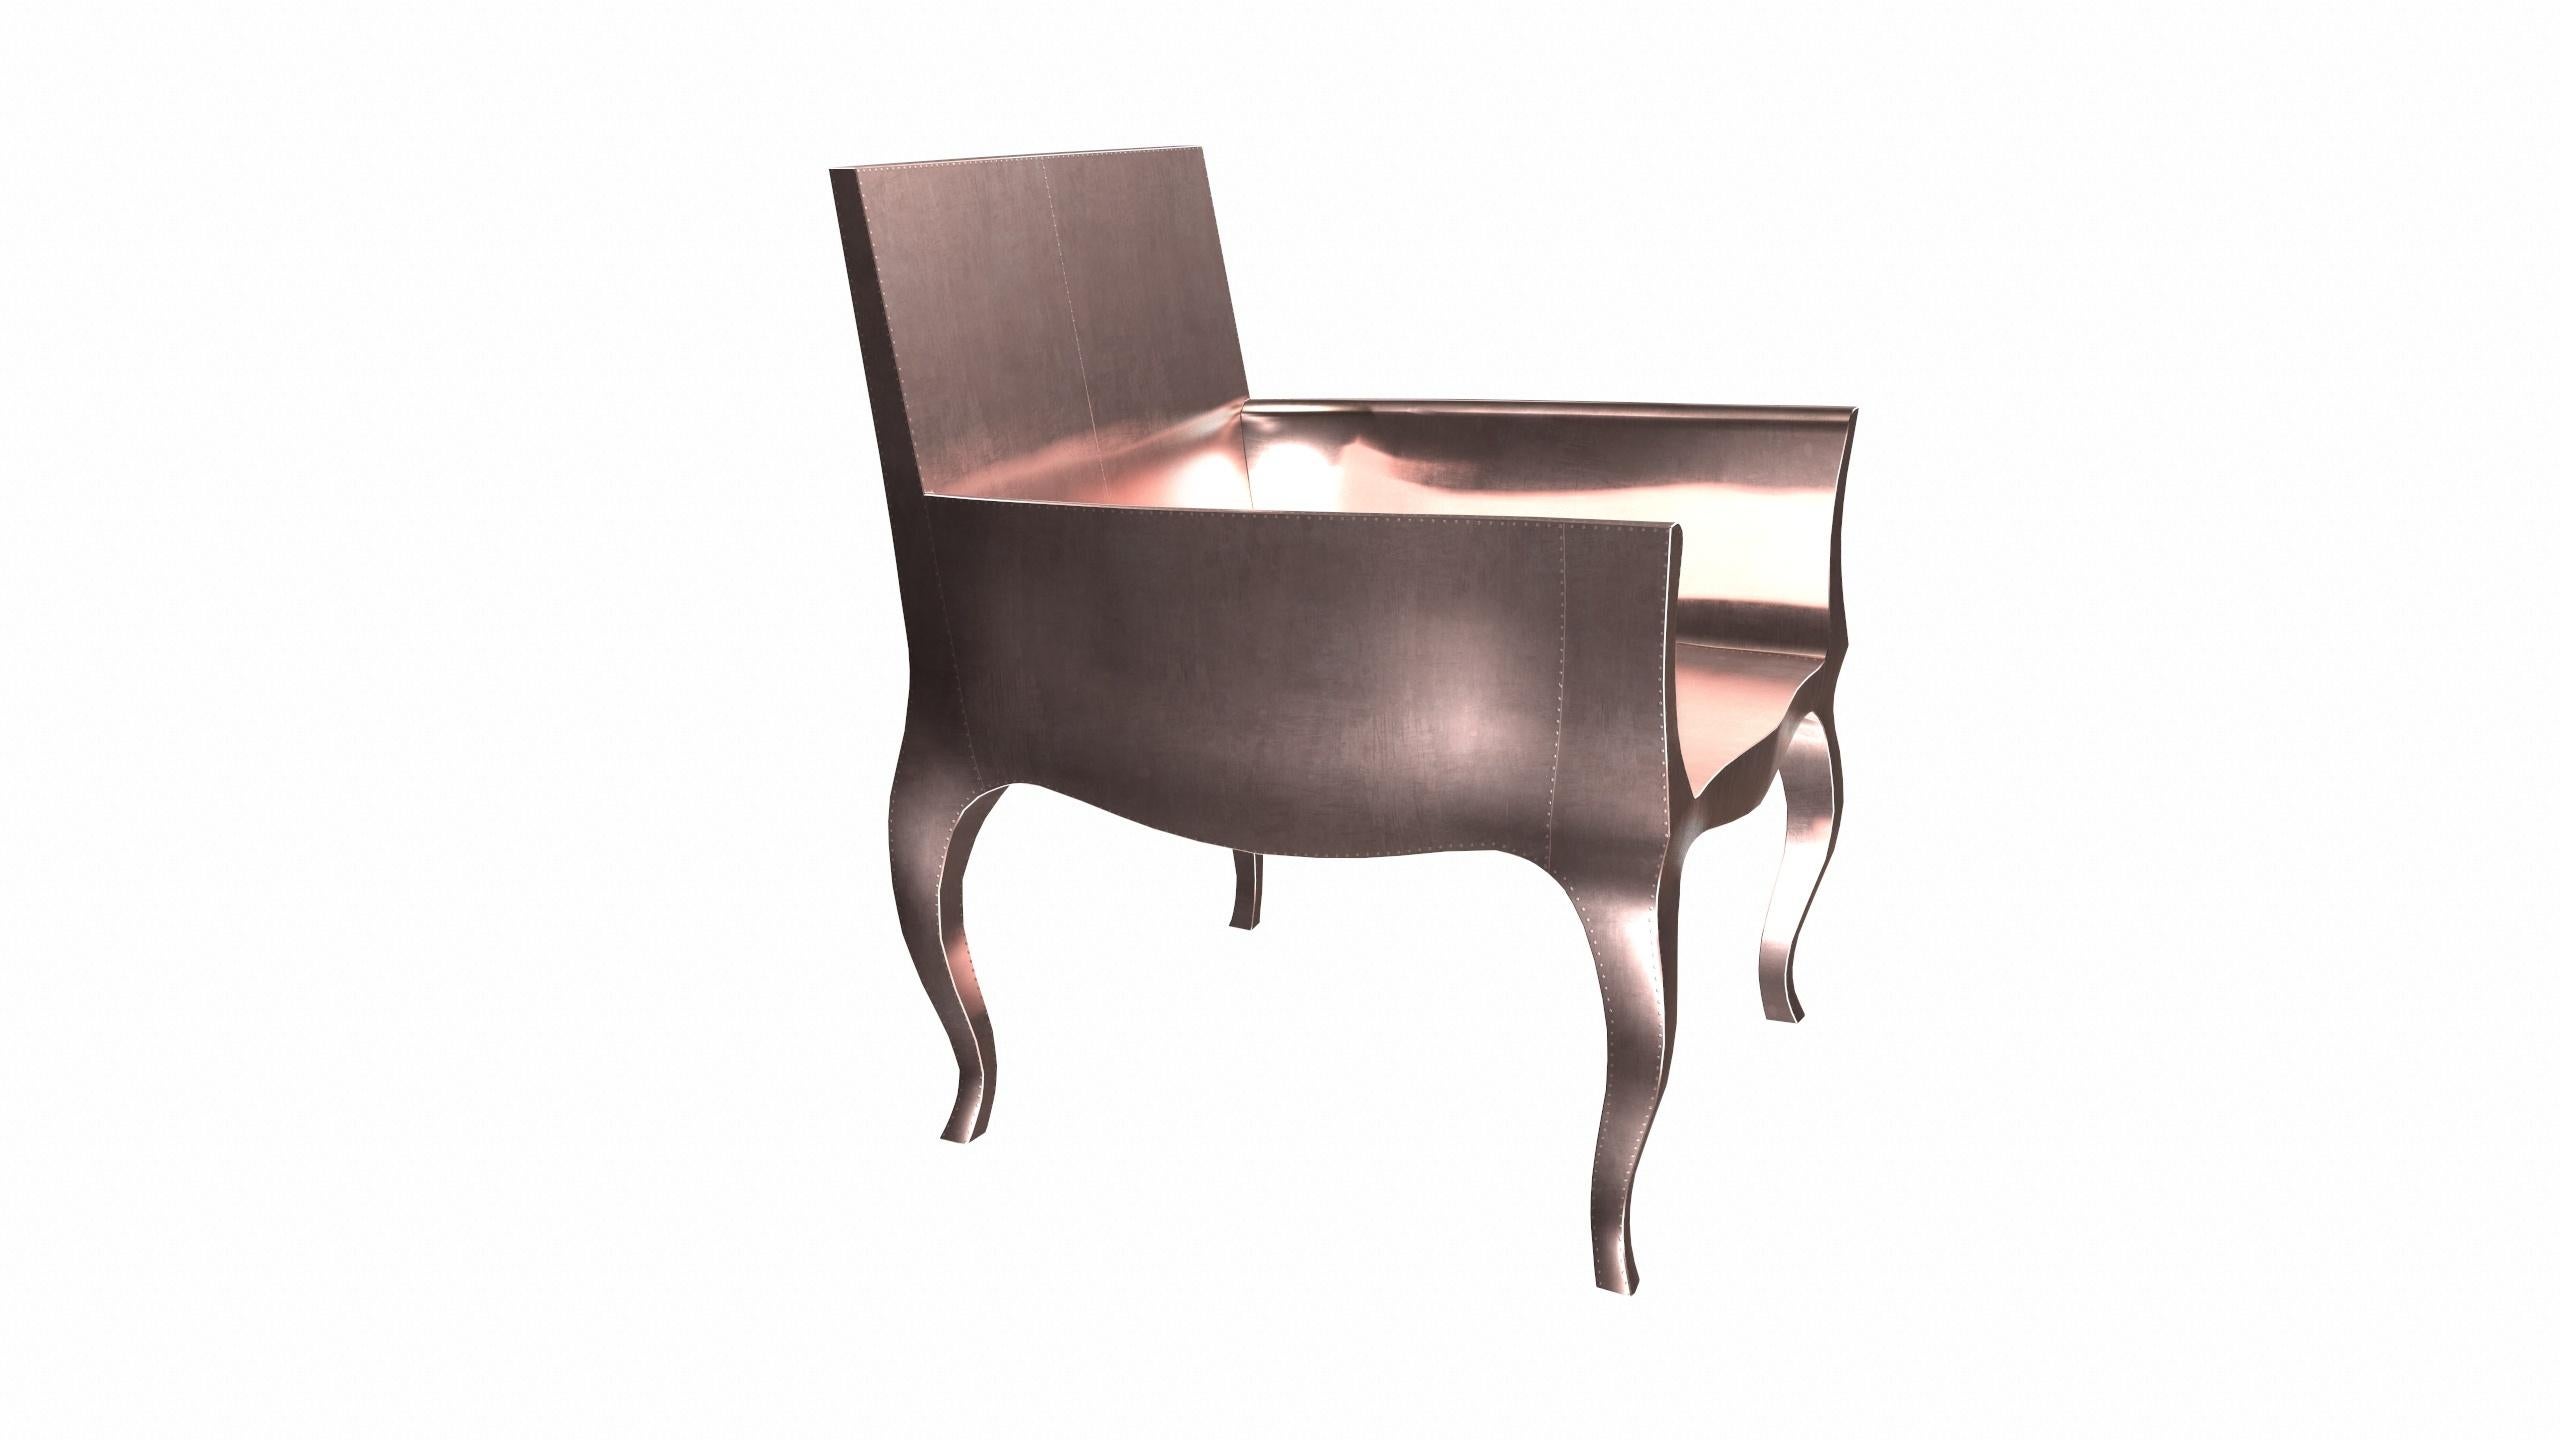 Hand-Carved Art Deco Accent Chair in Smooth Copper by Paul Mathieu for S. Odegard For Sale